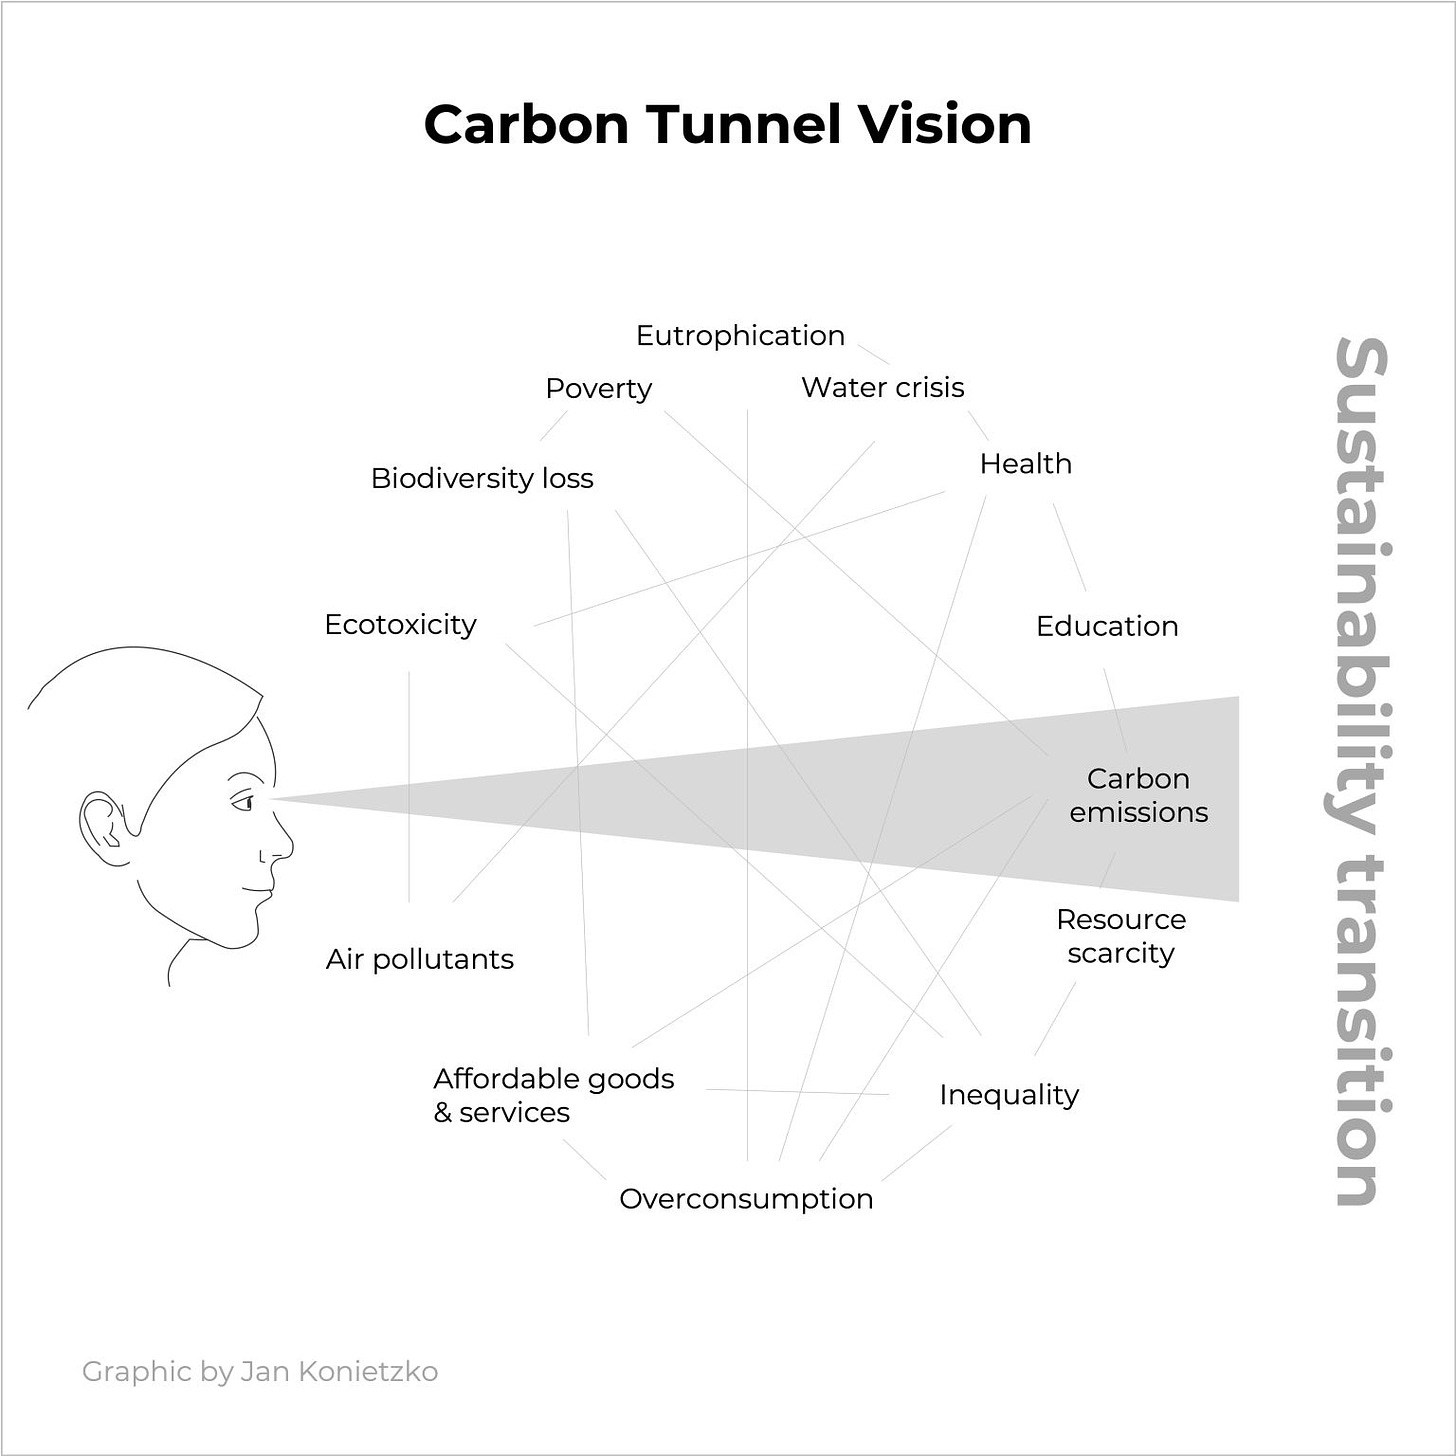 Systems Innovation on Twitter: "This graphic by Jan Konietzko seems to say  it all when it comes to our approach to dealing with a complex  environmental crisis through traditional reductionist approaches by